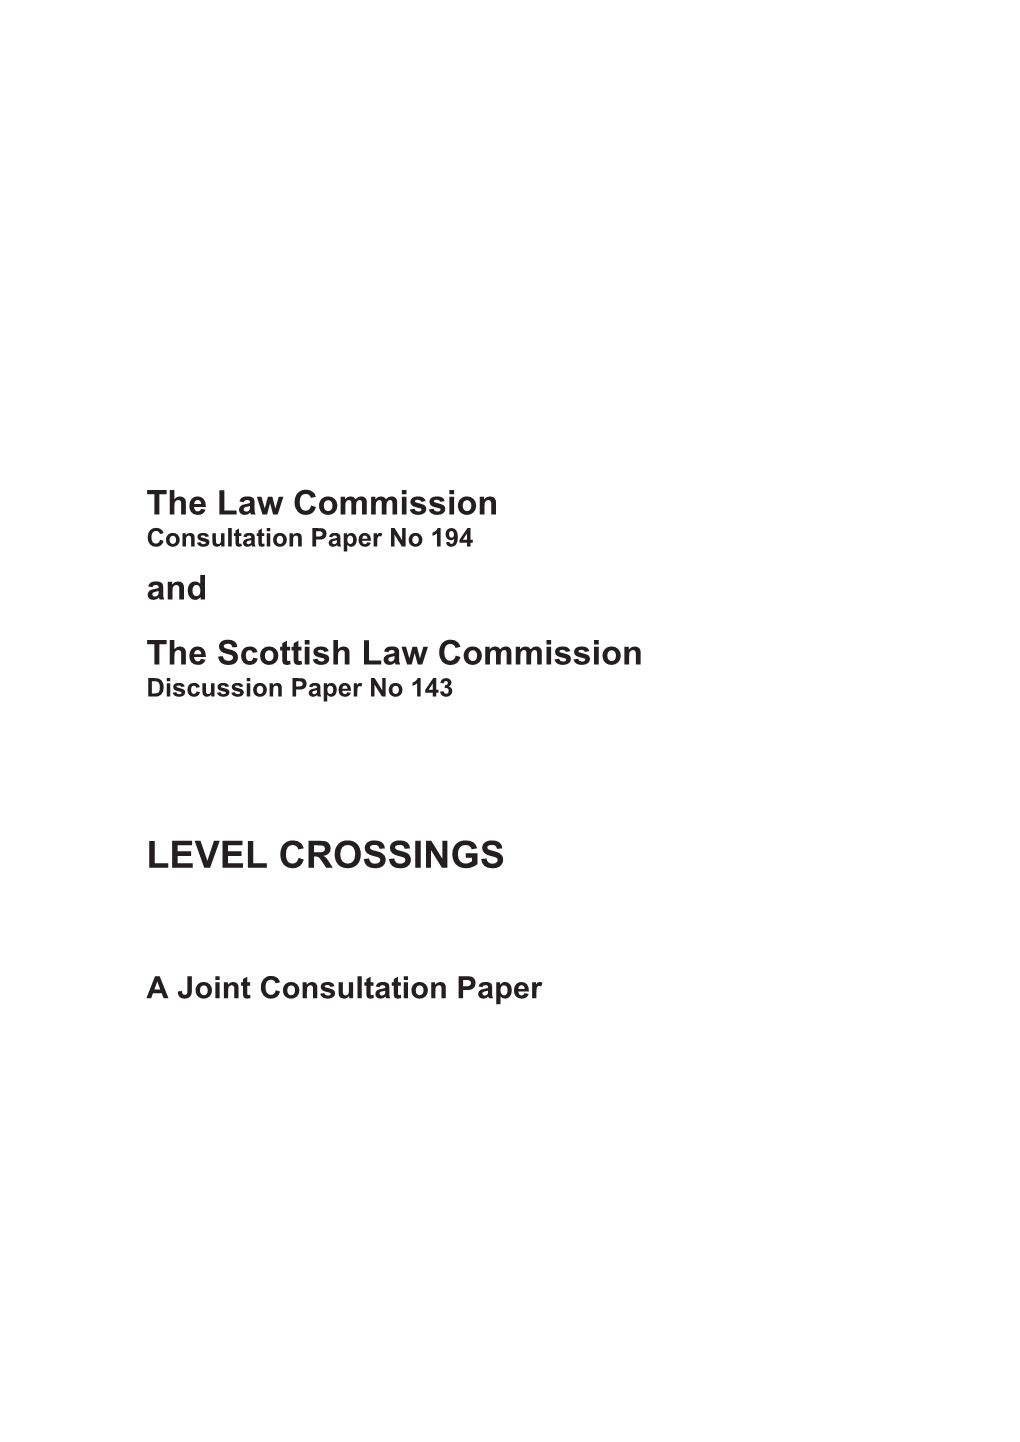 Level Crossings: a Joint Consultation Paper (SLC DP 143; LC CP 194)